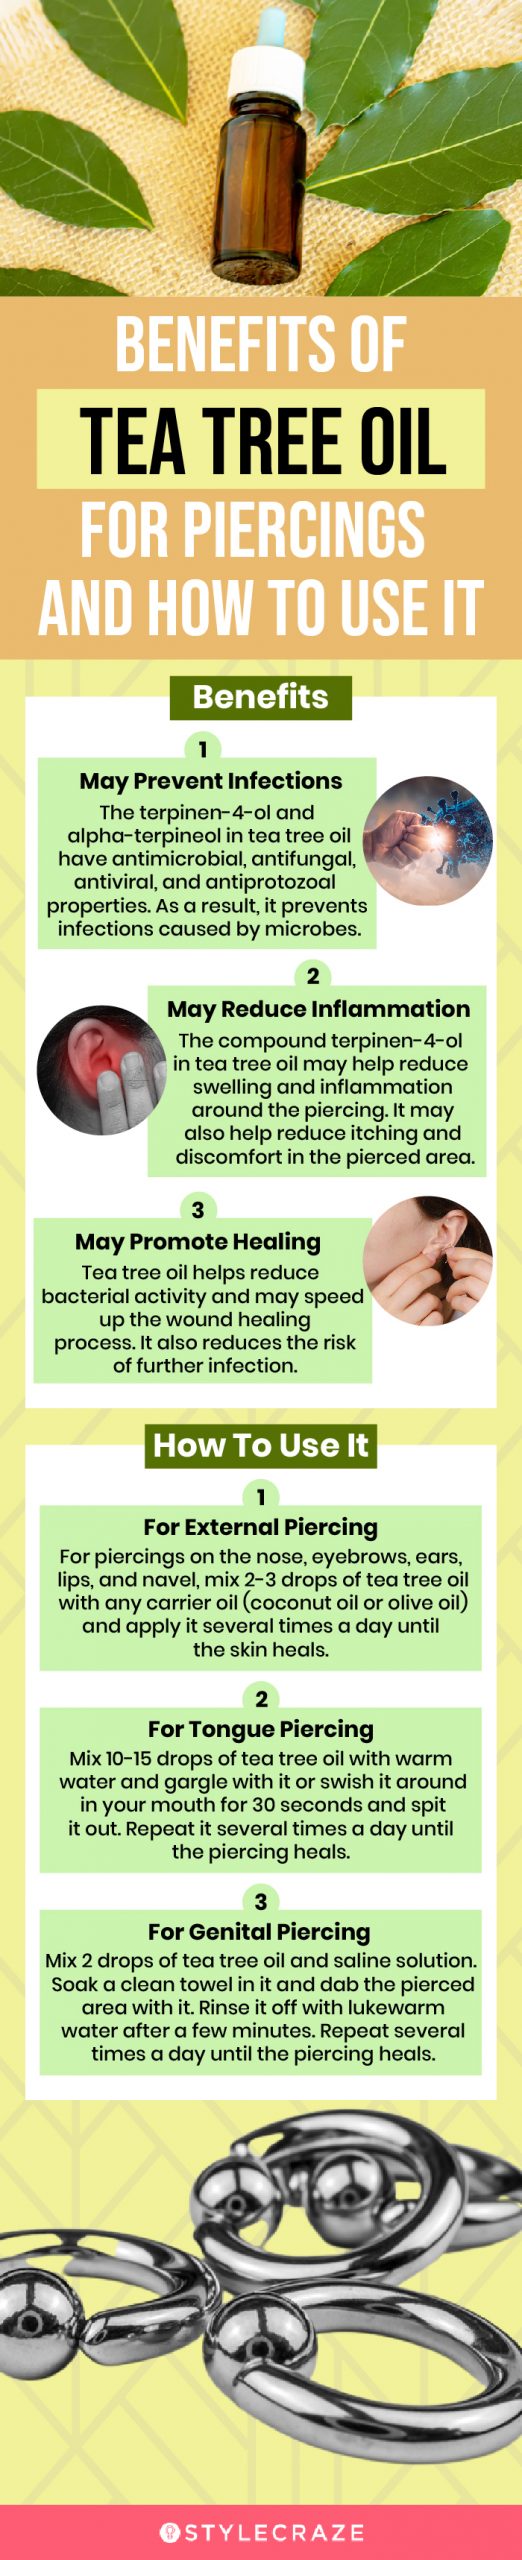 benefits of tea tree oil for pearcings and how to use it (infographic)